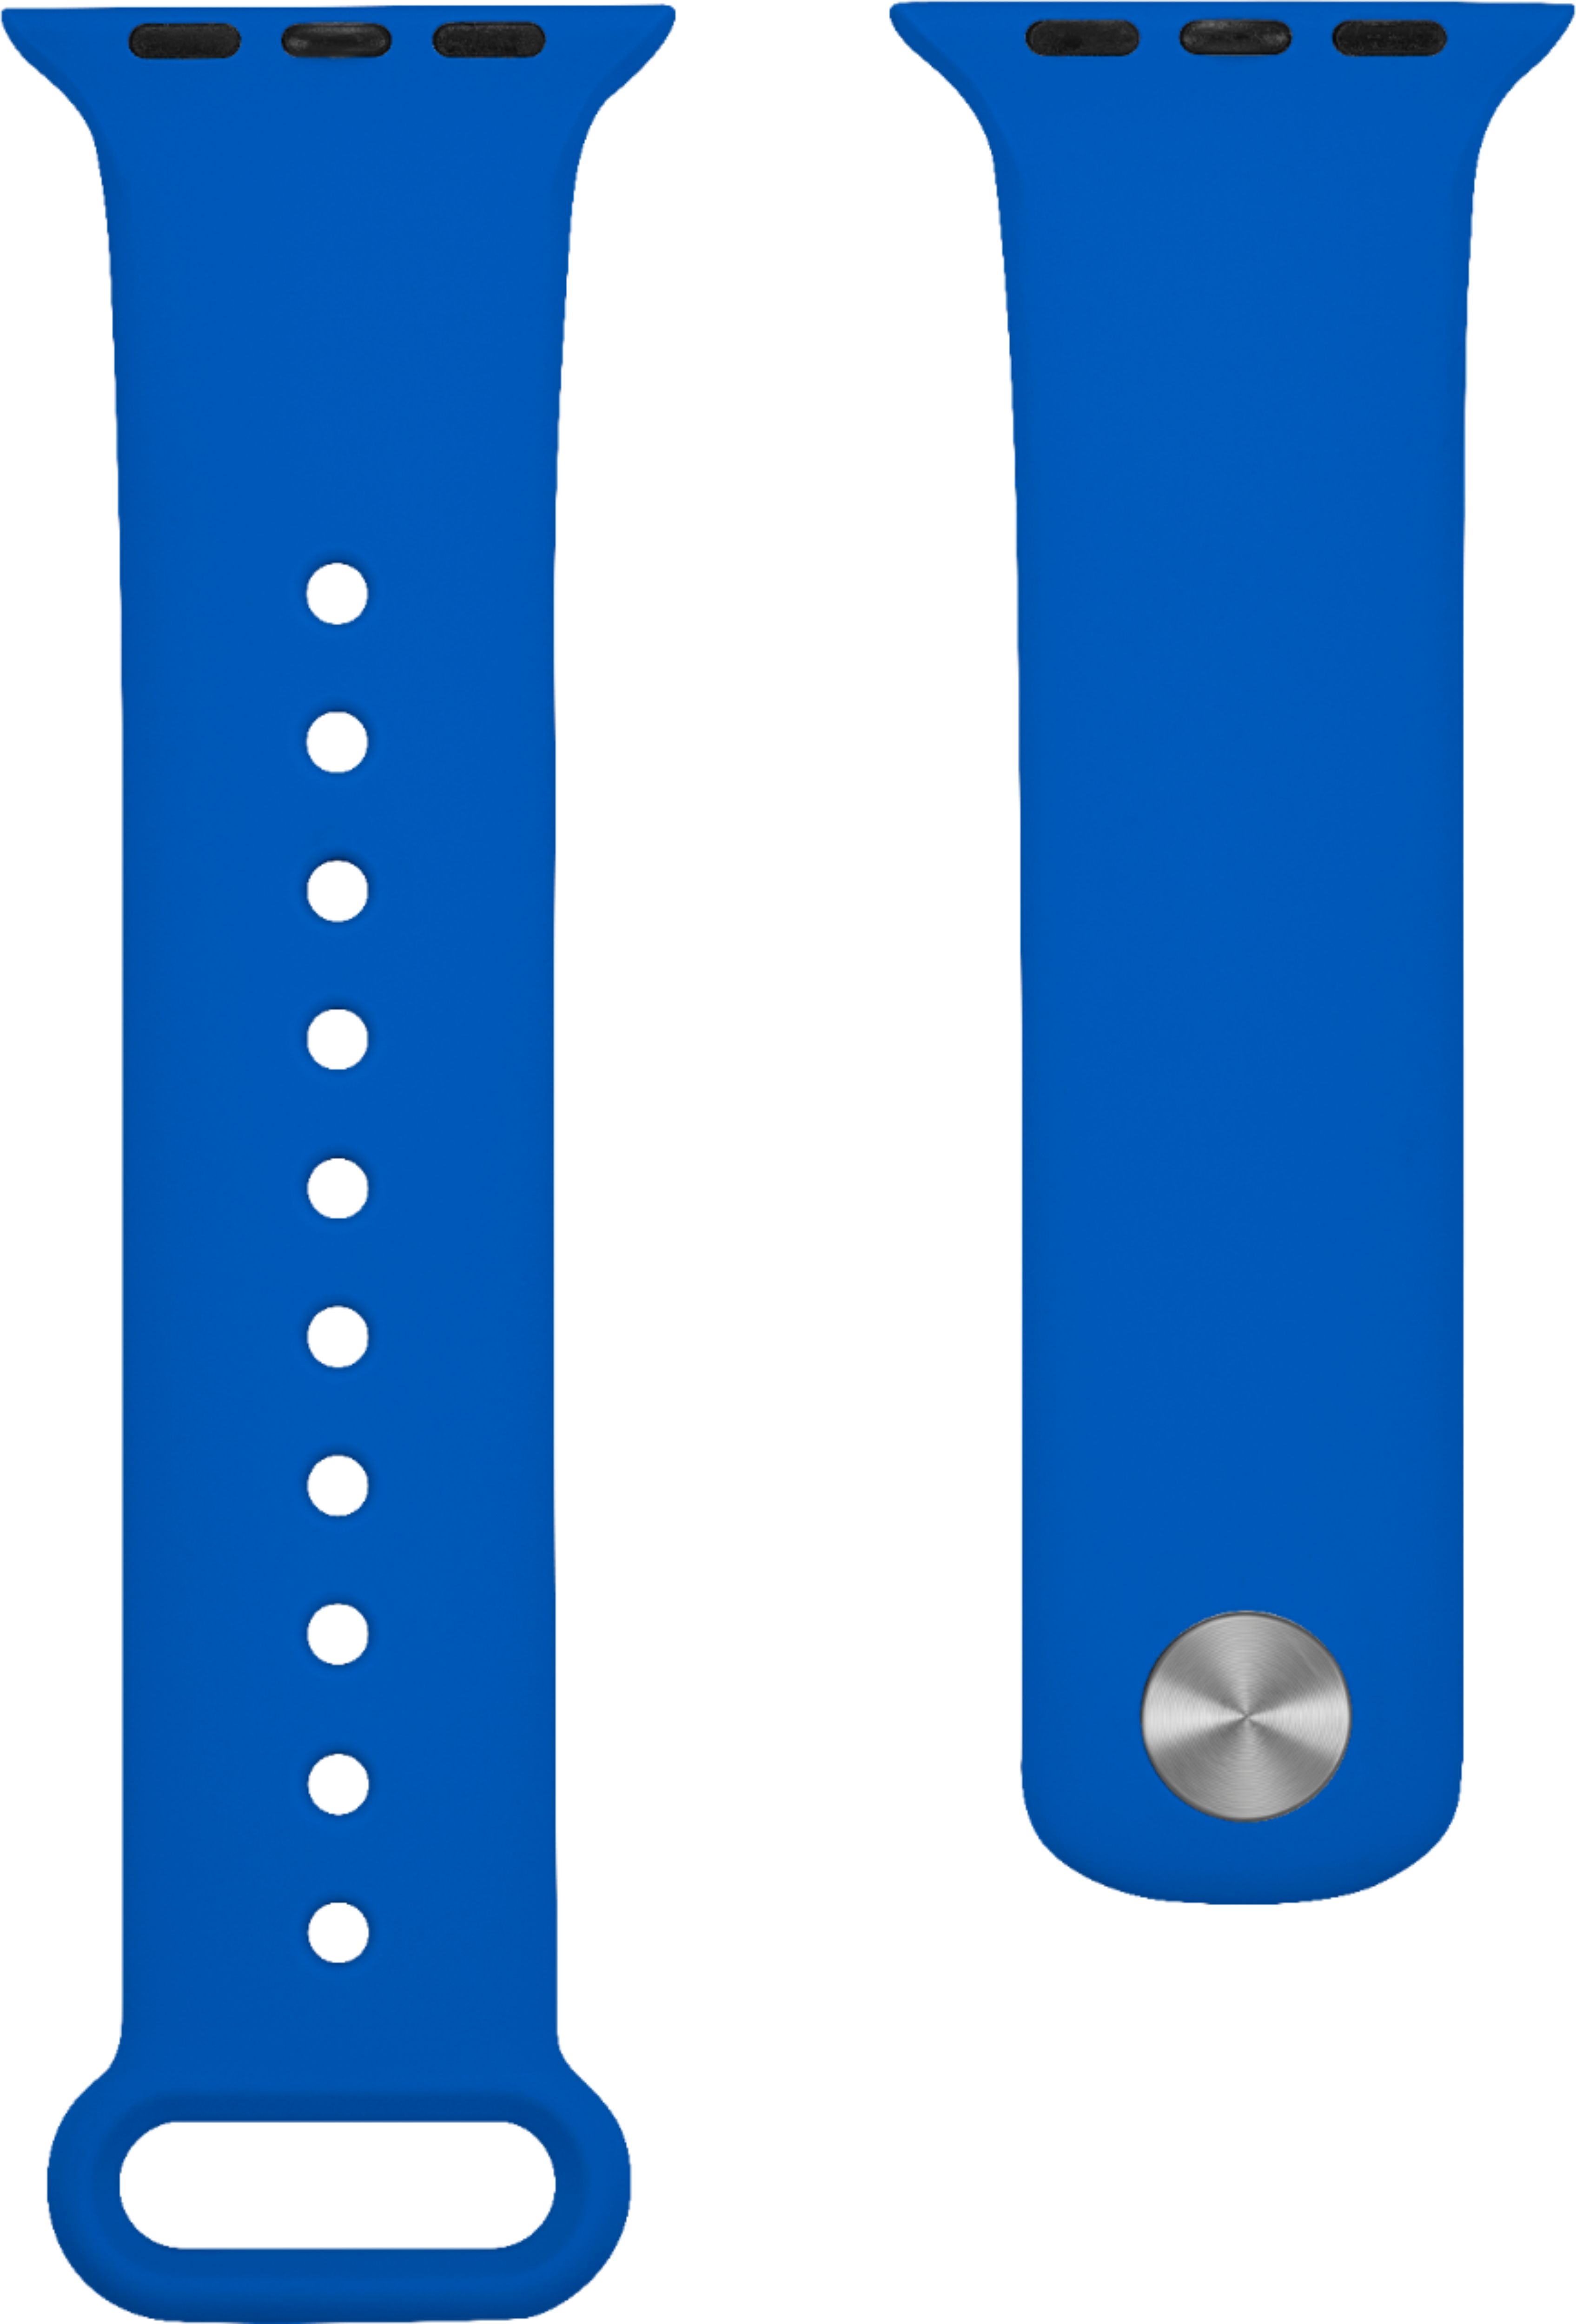 Modal™ - Silicone Band for Apple Watch 38mm, 40mm, 41mm and Apple Watch Series 8 41mm - Bright Blue